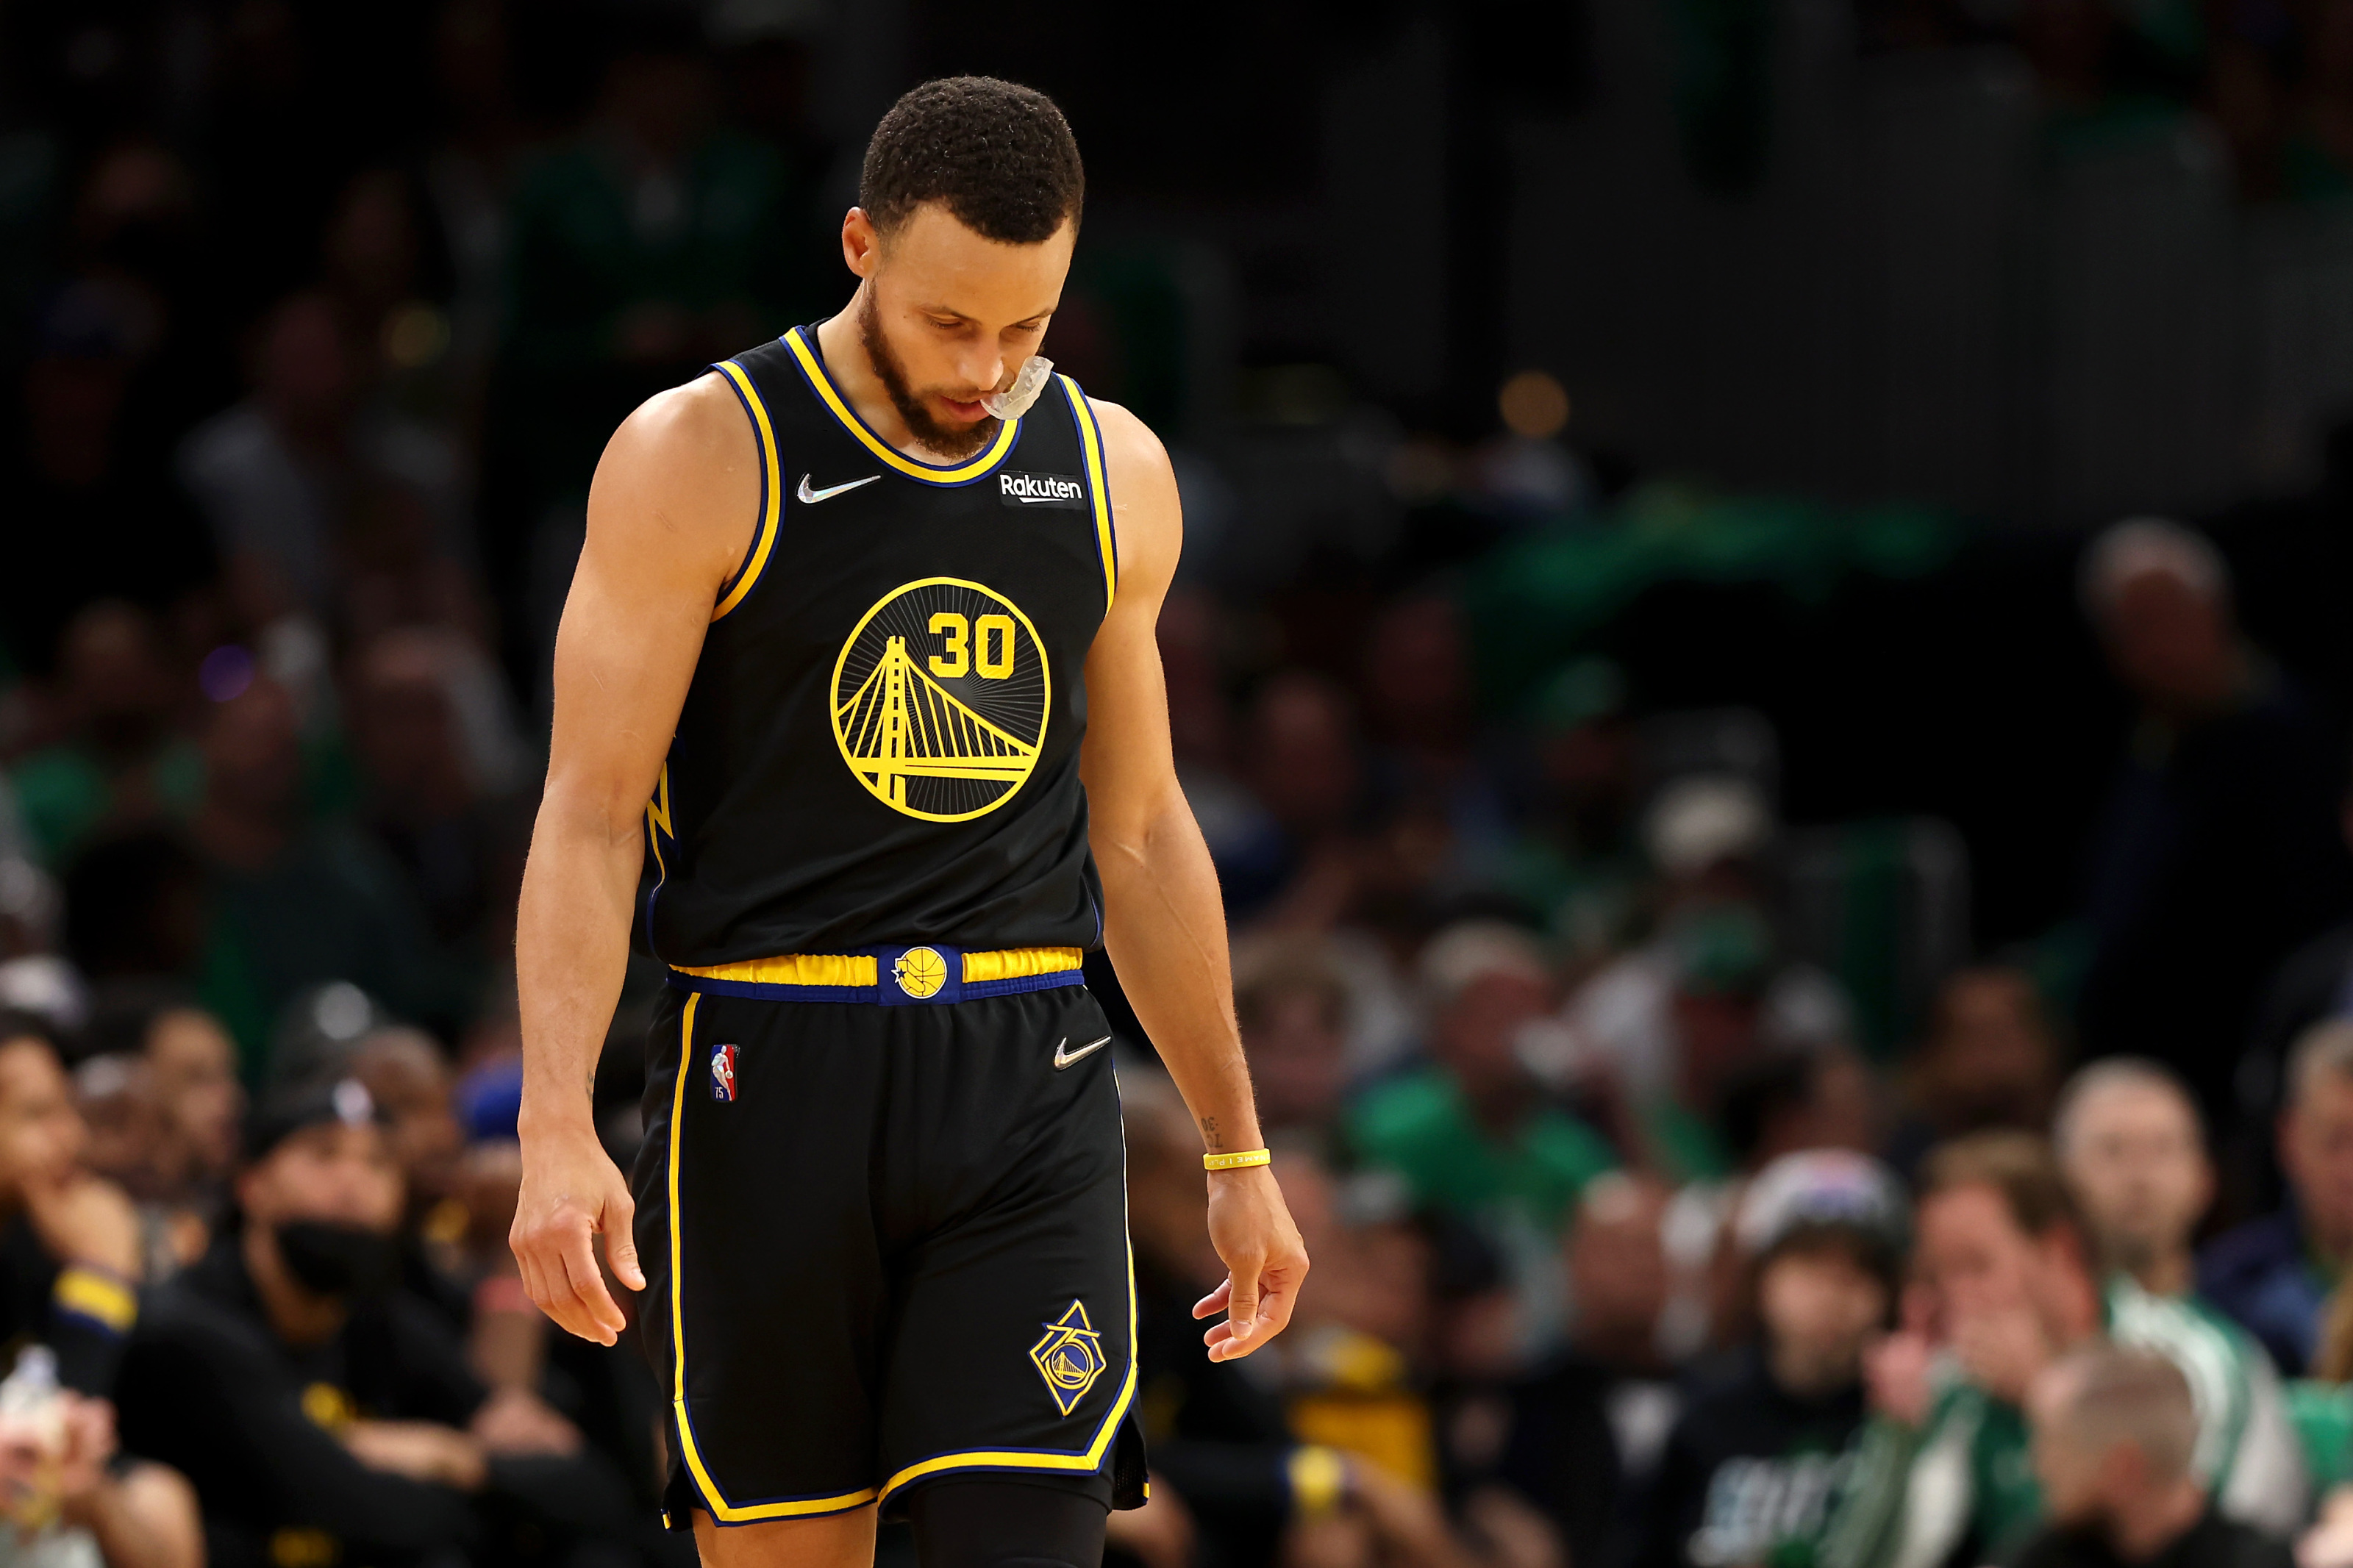 Stephen Curry makes history with 3-point shooting against Celtics in Game 1  of NBA Finals 